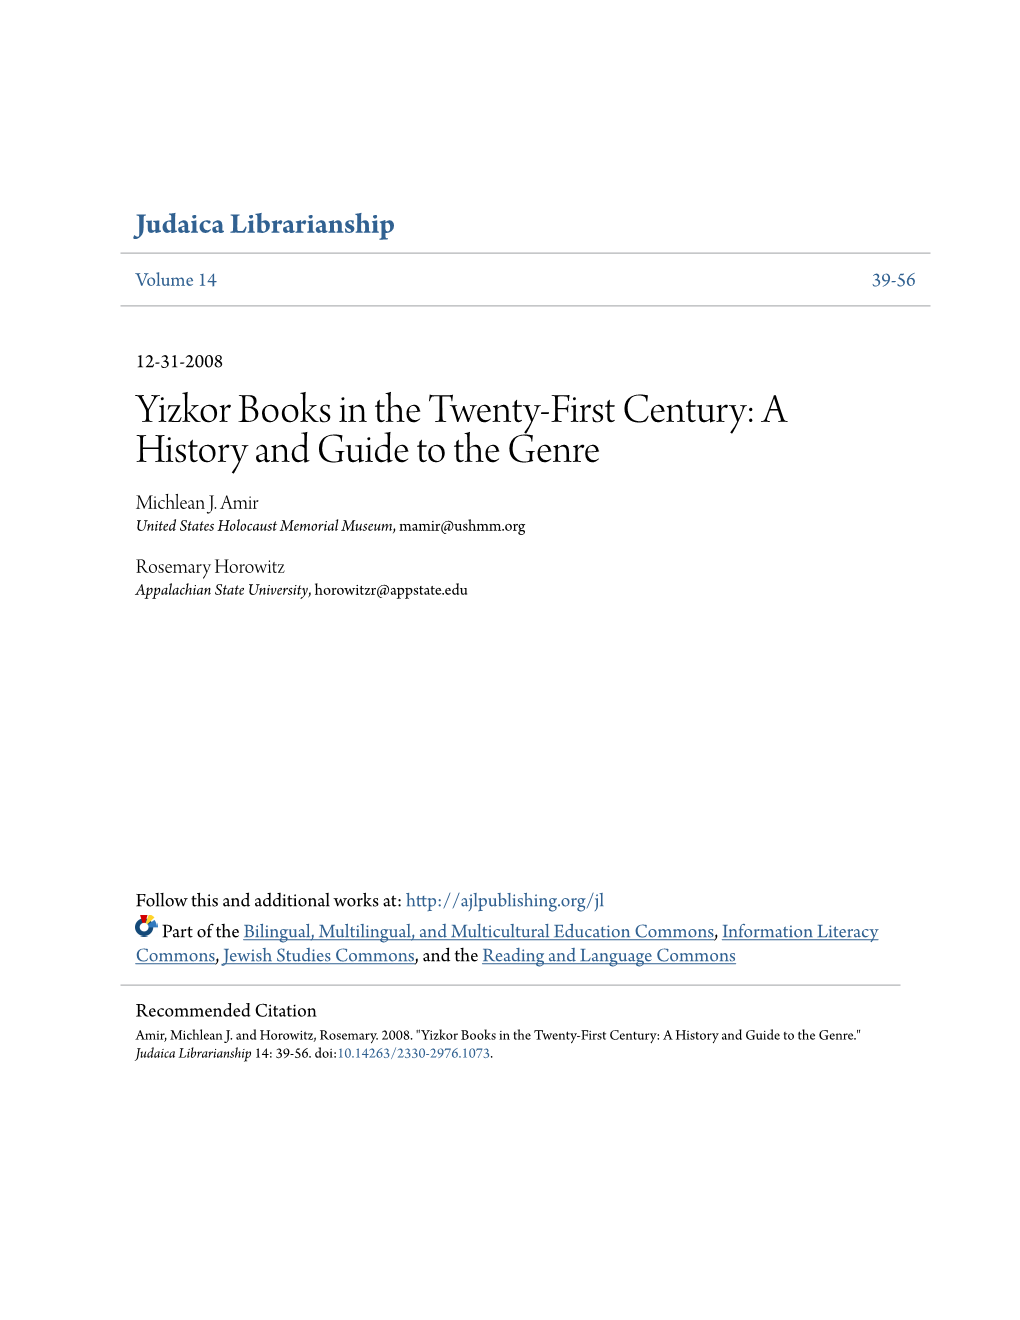 Yizkor Books in the Twenty-First Century: a History and Guide to the Genre Michlean J